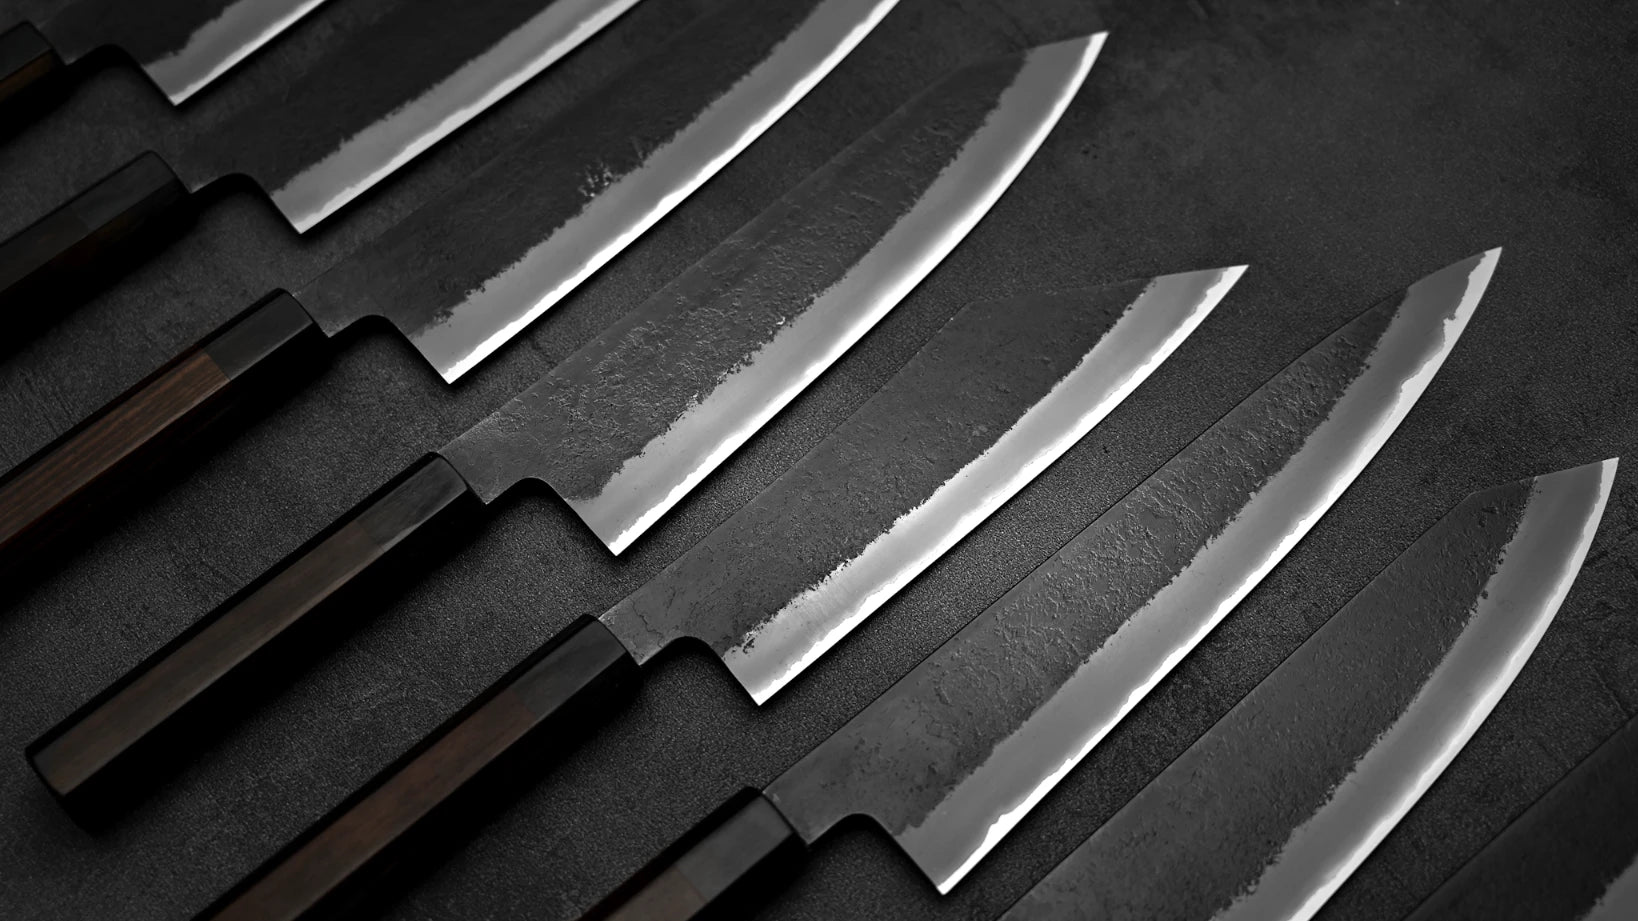 A group photo of Japanese knives hand-forged by Mutsumi Hinoura